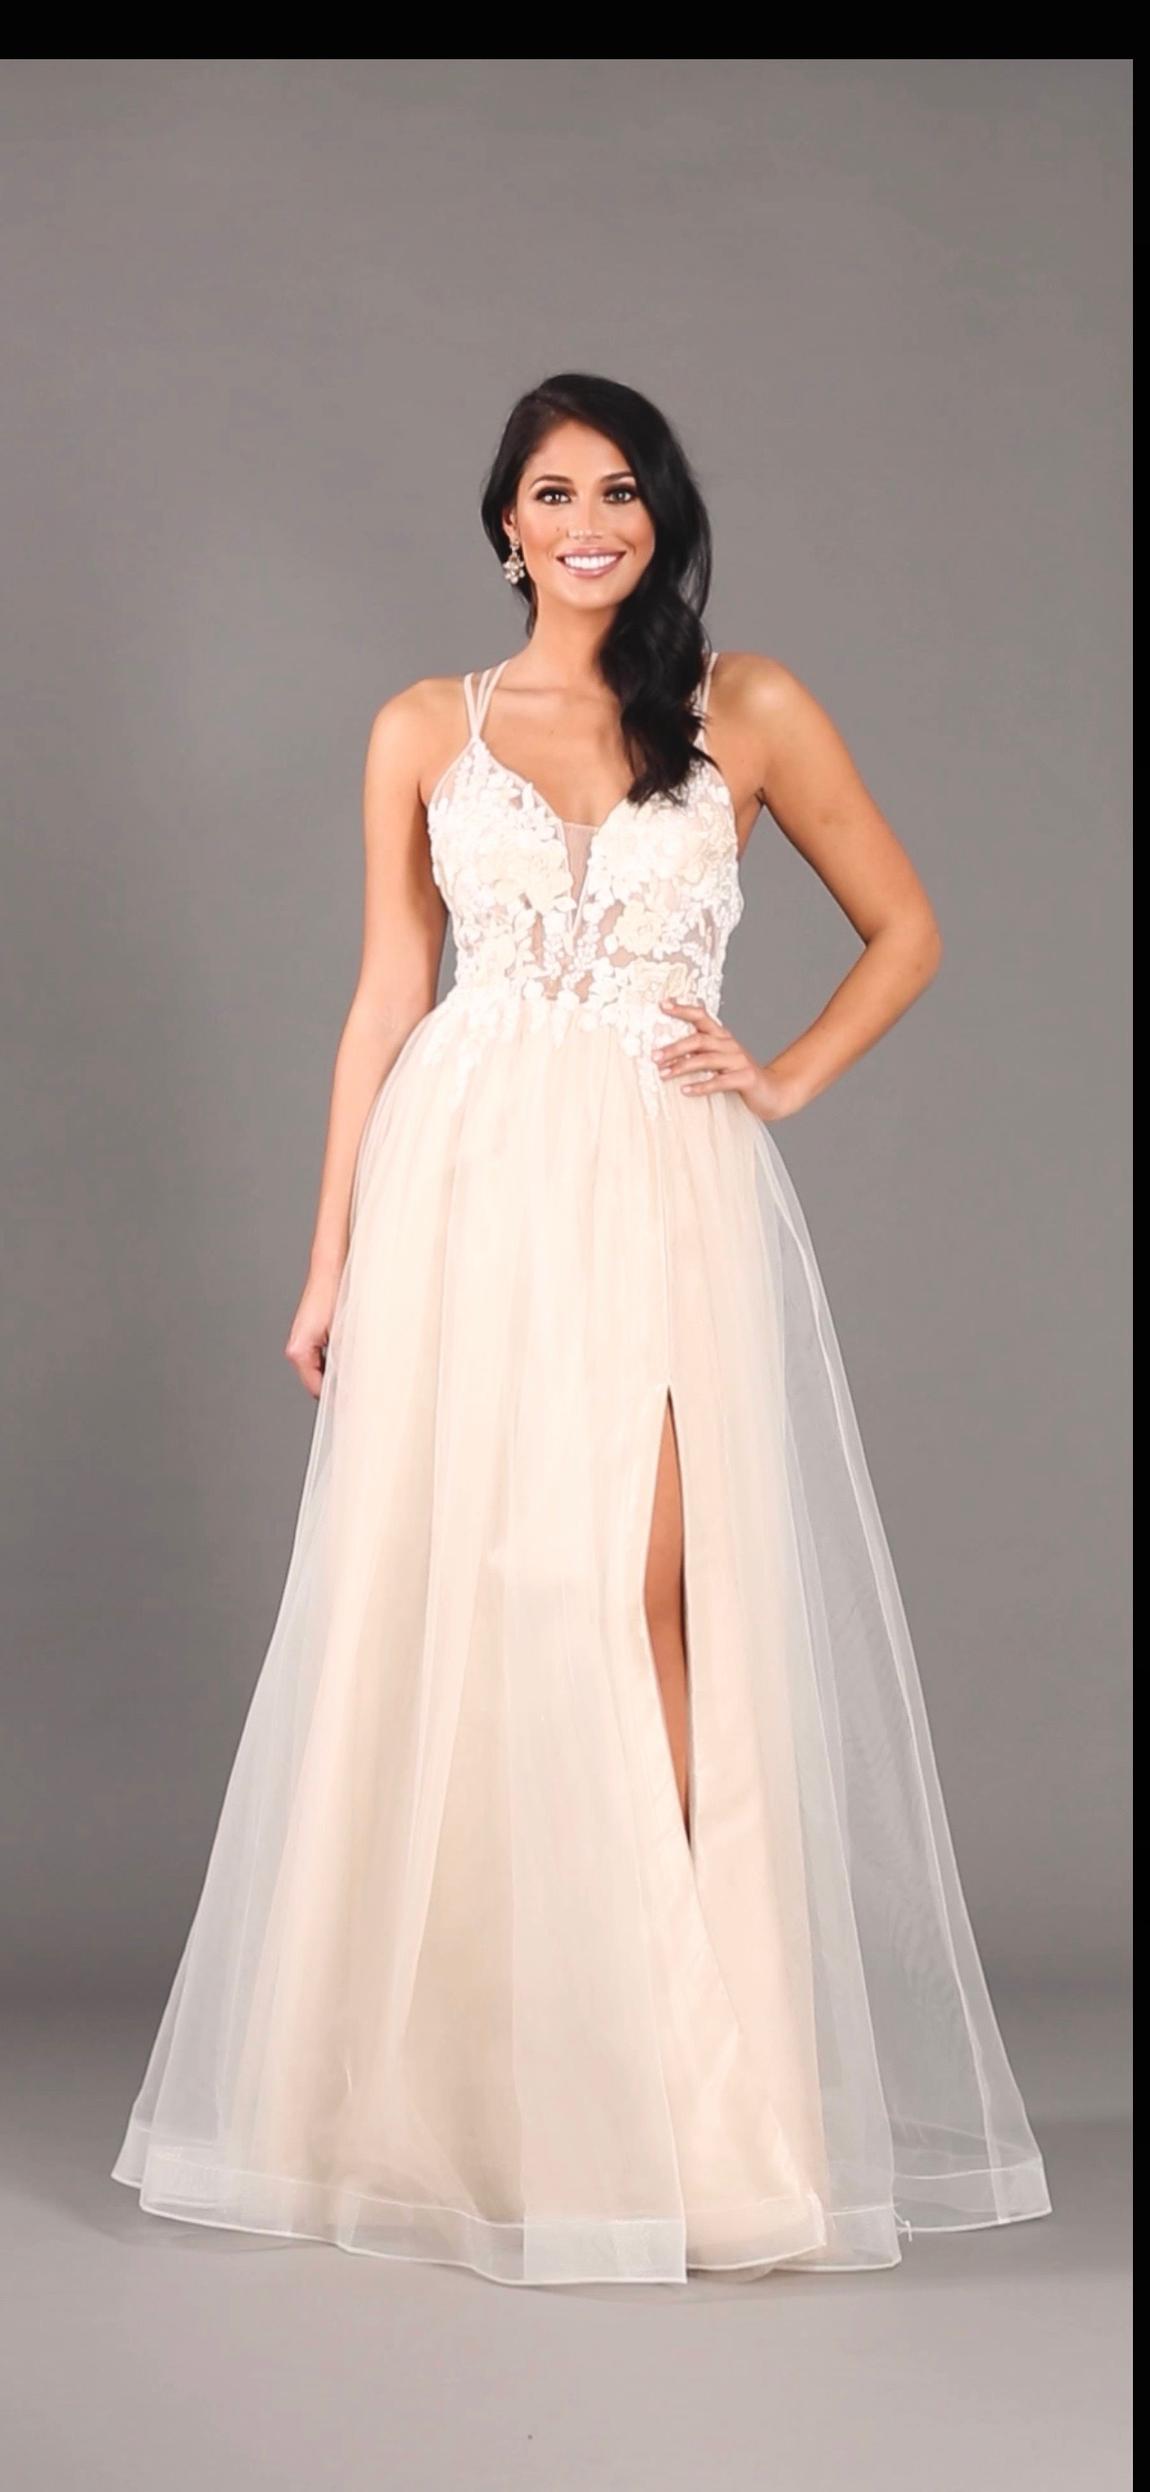 Formal Dress: 61110. Long Sexy White Dress, Plunging Neckline, High-low